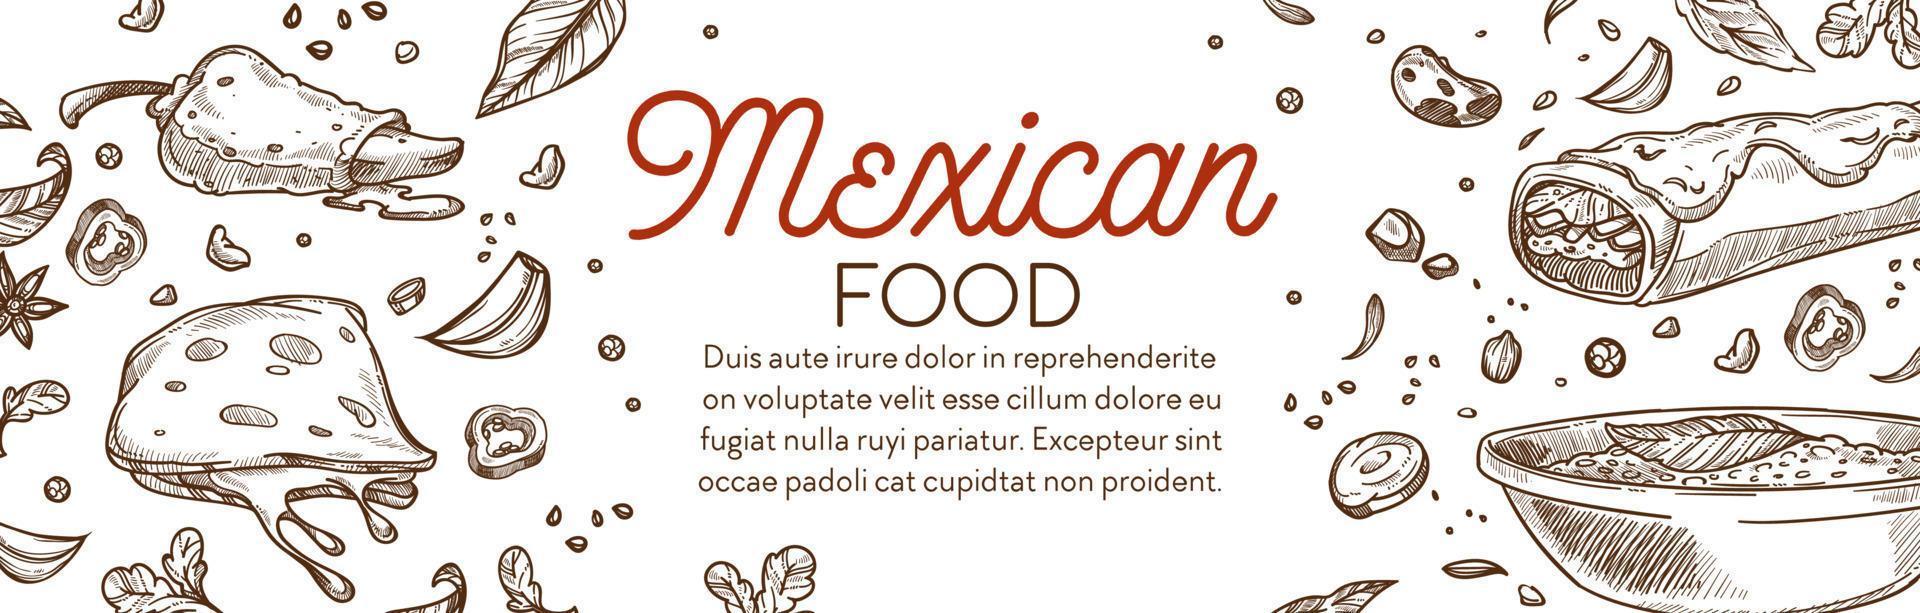 Mexican food monochrome menu with dishes vector